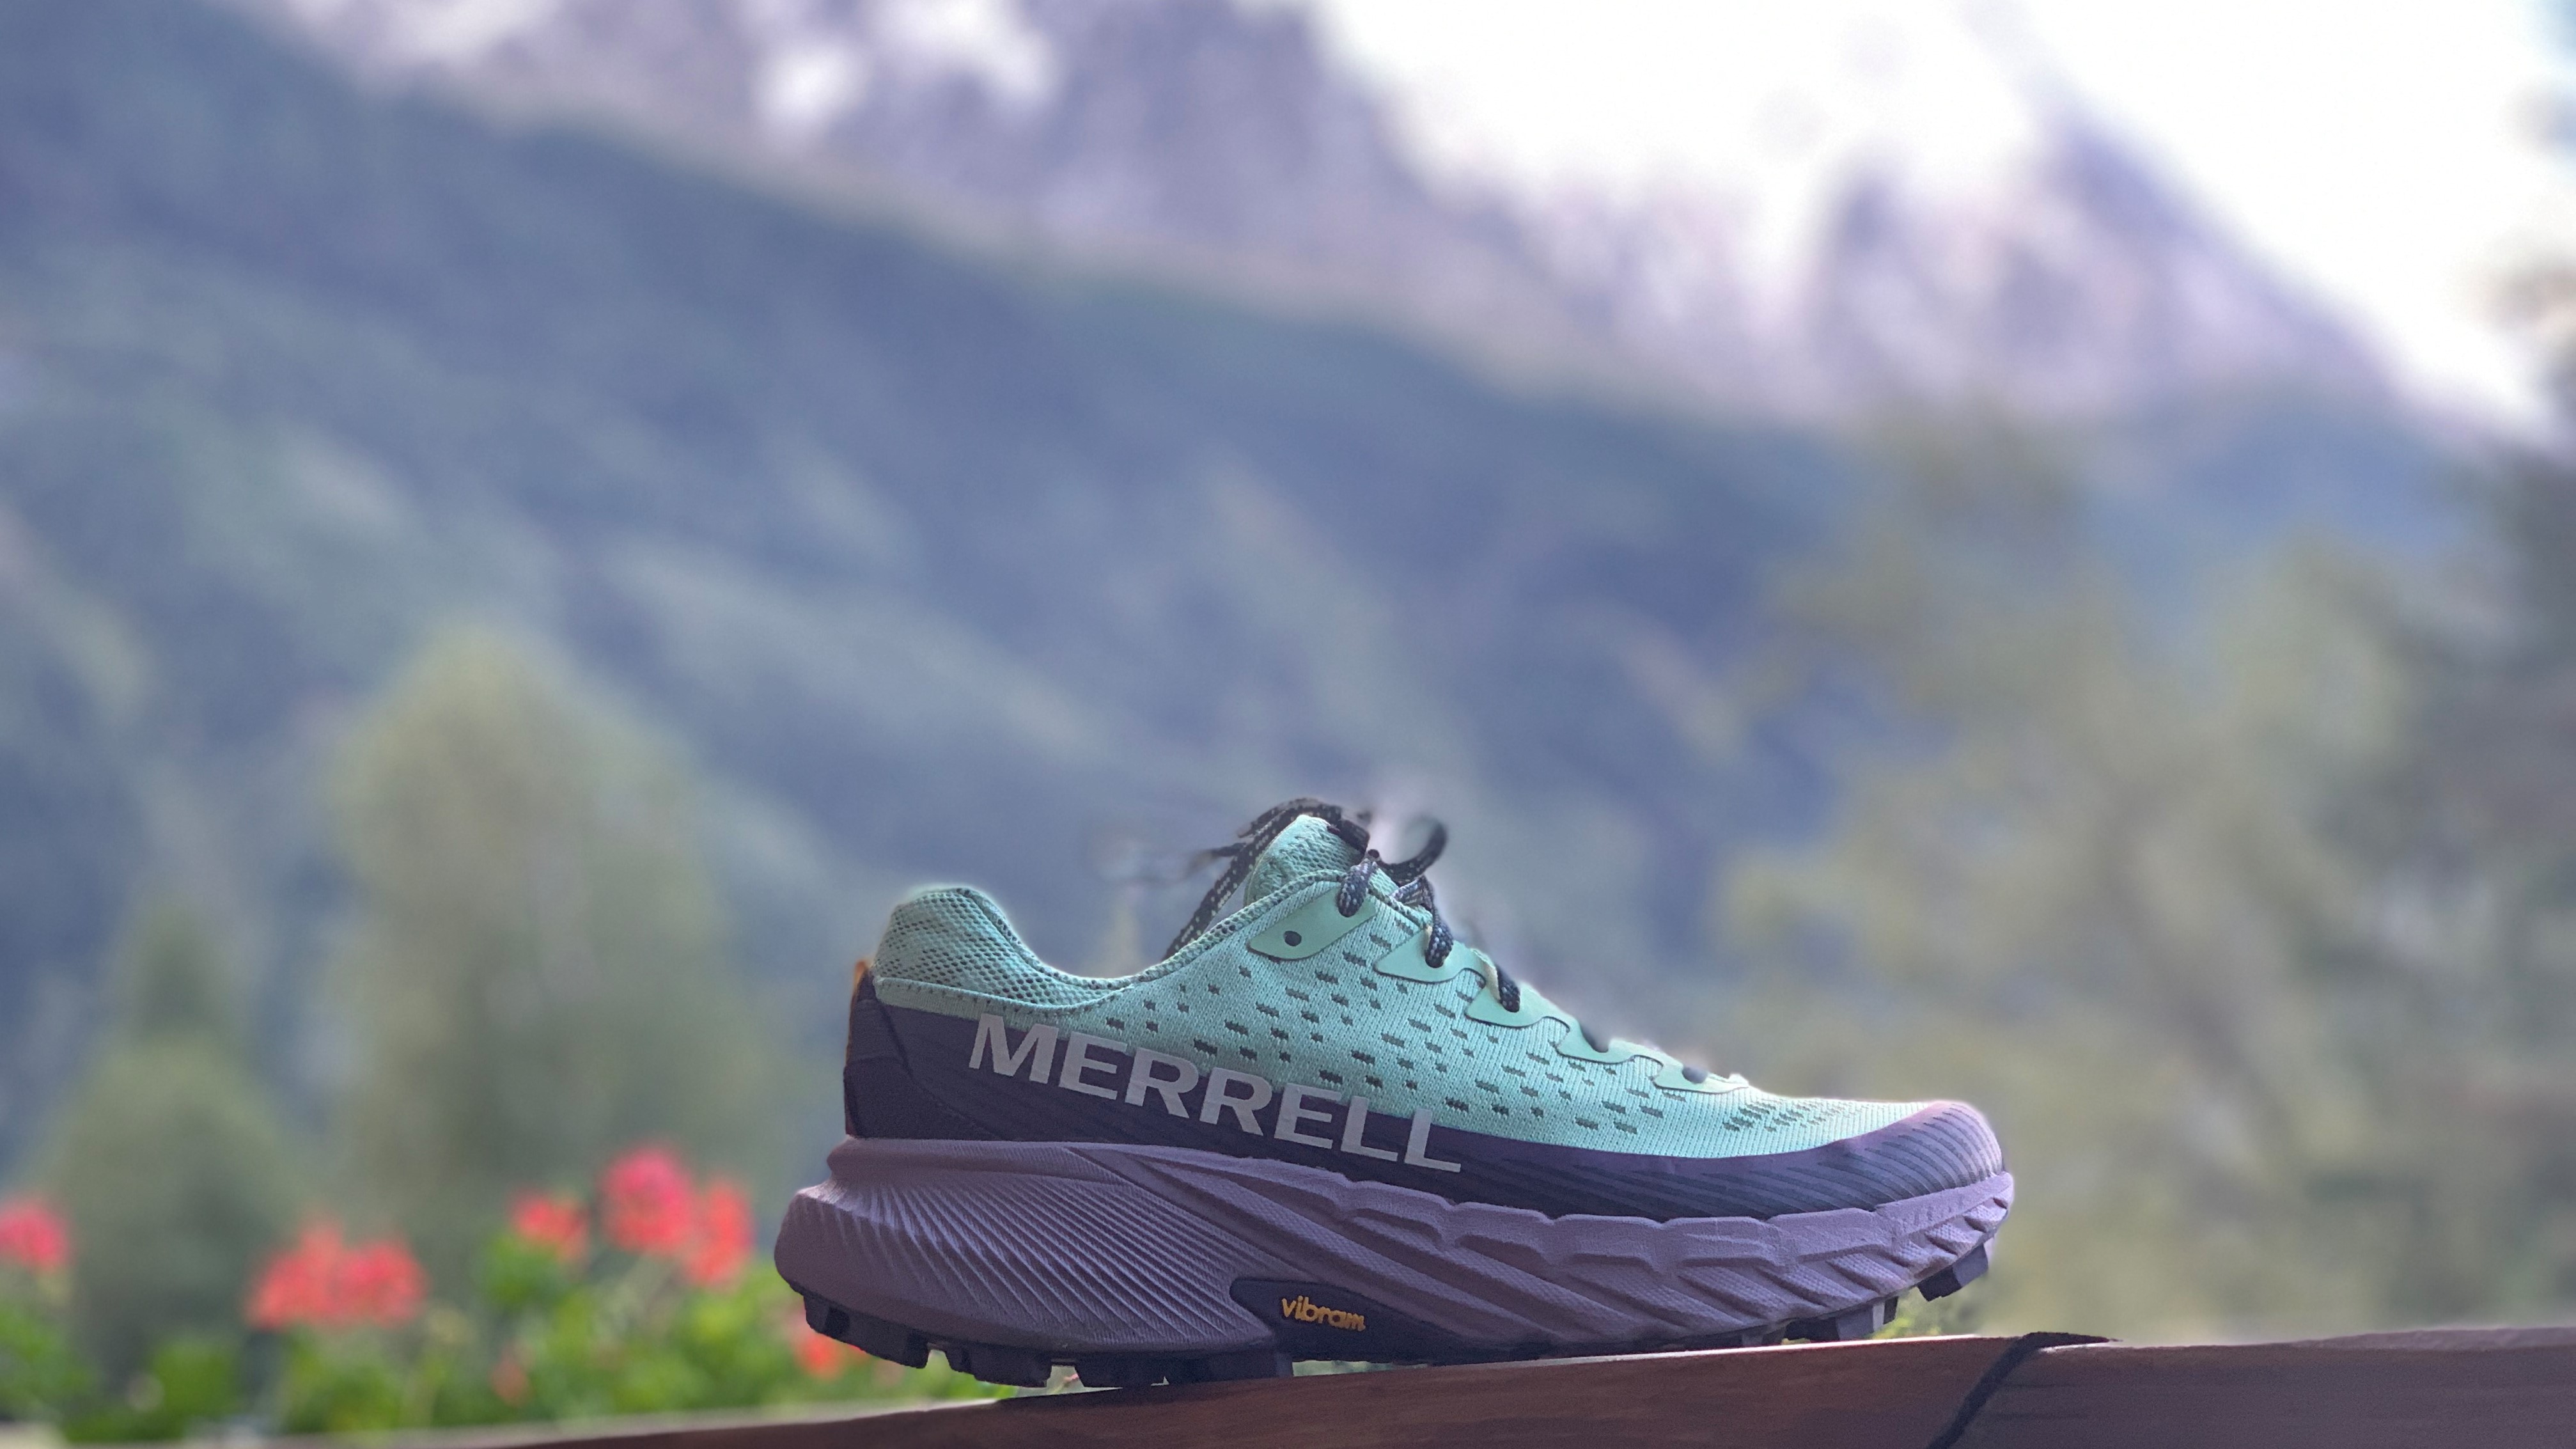 Review: Merrell True Glove Shoes (with lots of photos) - My FiveFingers